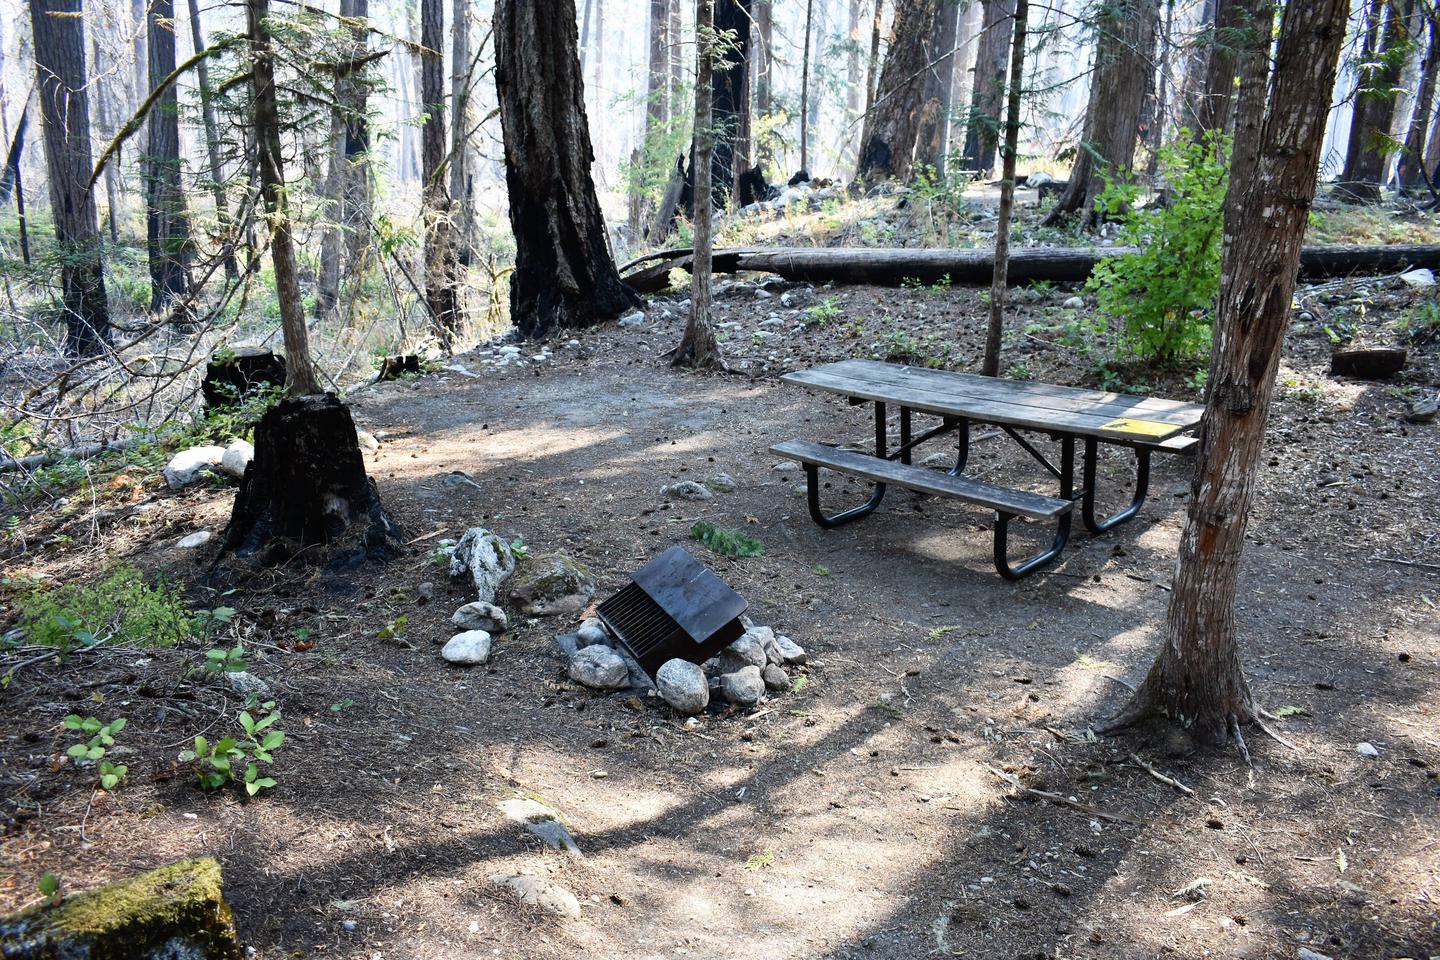 Tent area, fire ring, and picnic tableView of campsite